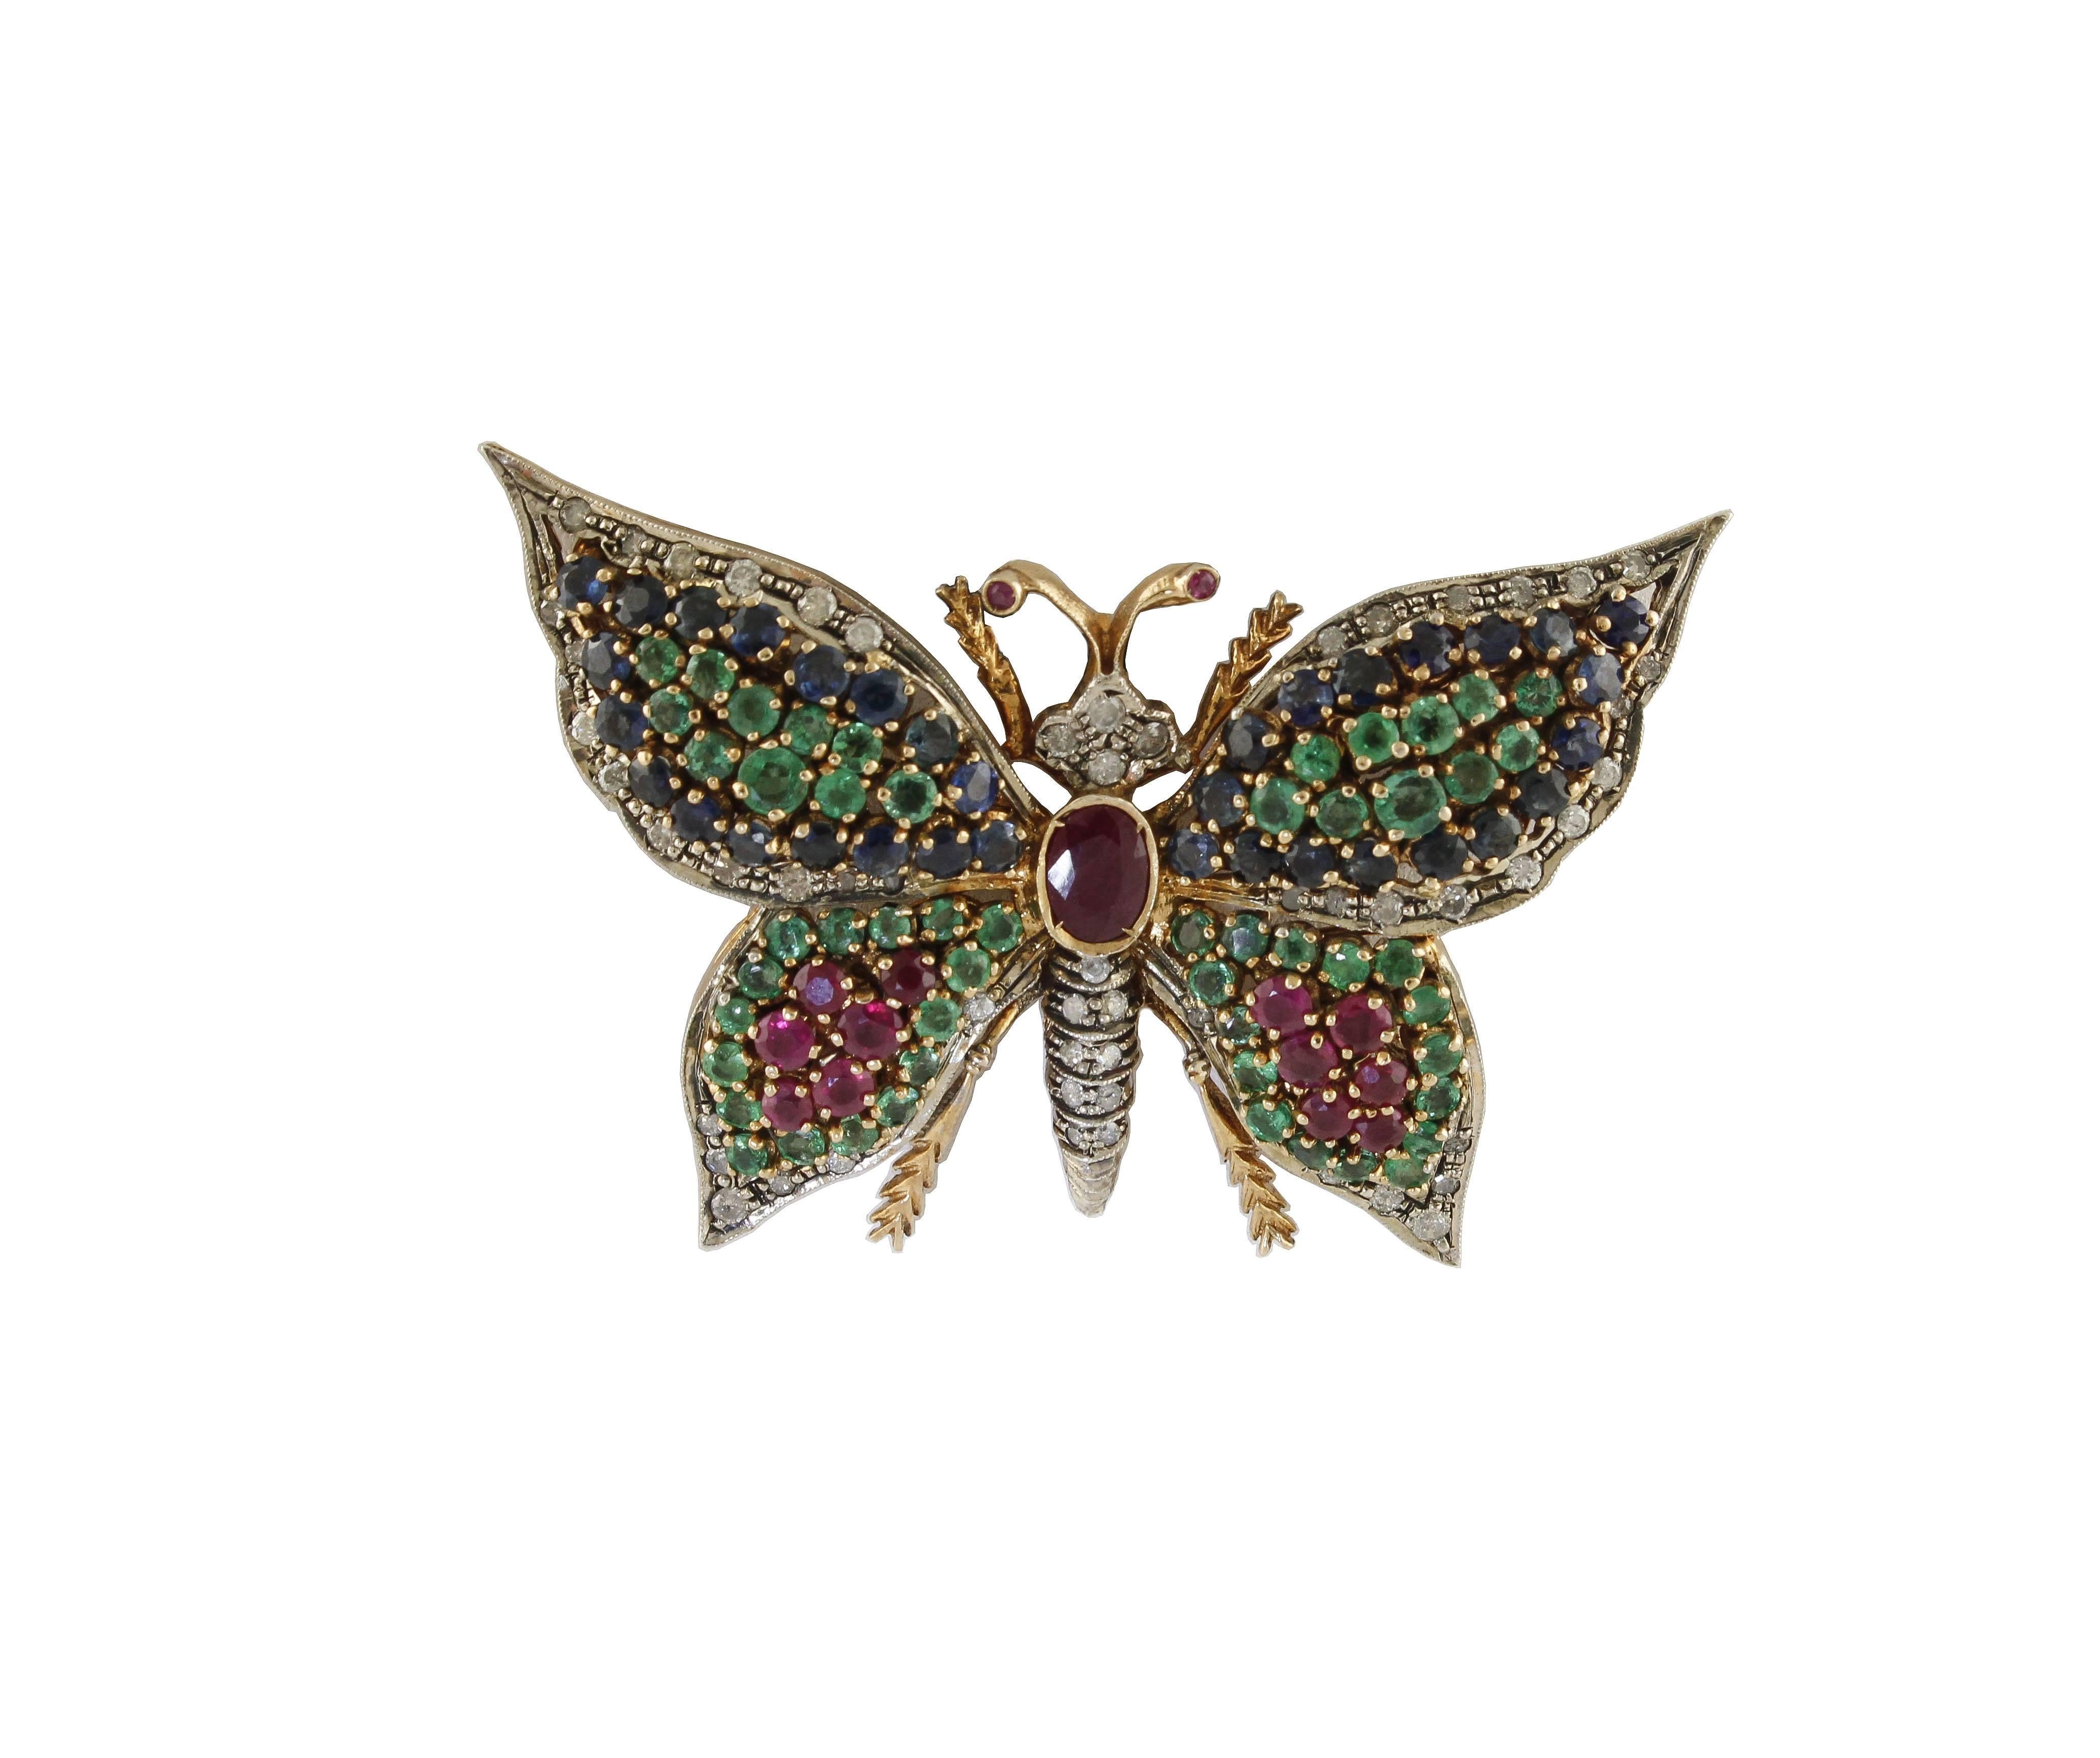 Amazing 9k gold and silver butterfly pendant necklace/ brooch  mounted with diamonds, rubies, emeralds, blue sapphires.
Diamonds 1.28 ct
Rubies, Emeralds, Blue Sapphires 7.88 ct 
Tot.Weight 22.20 g
R.F ffhh 

For any enquires, please contact the